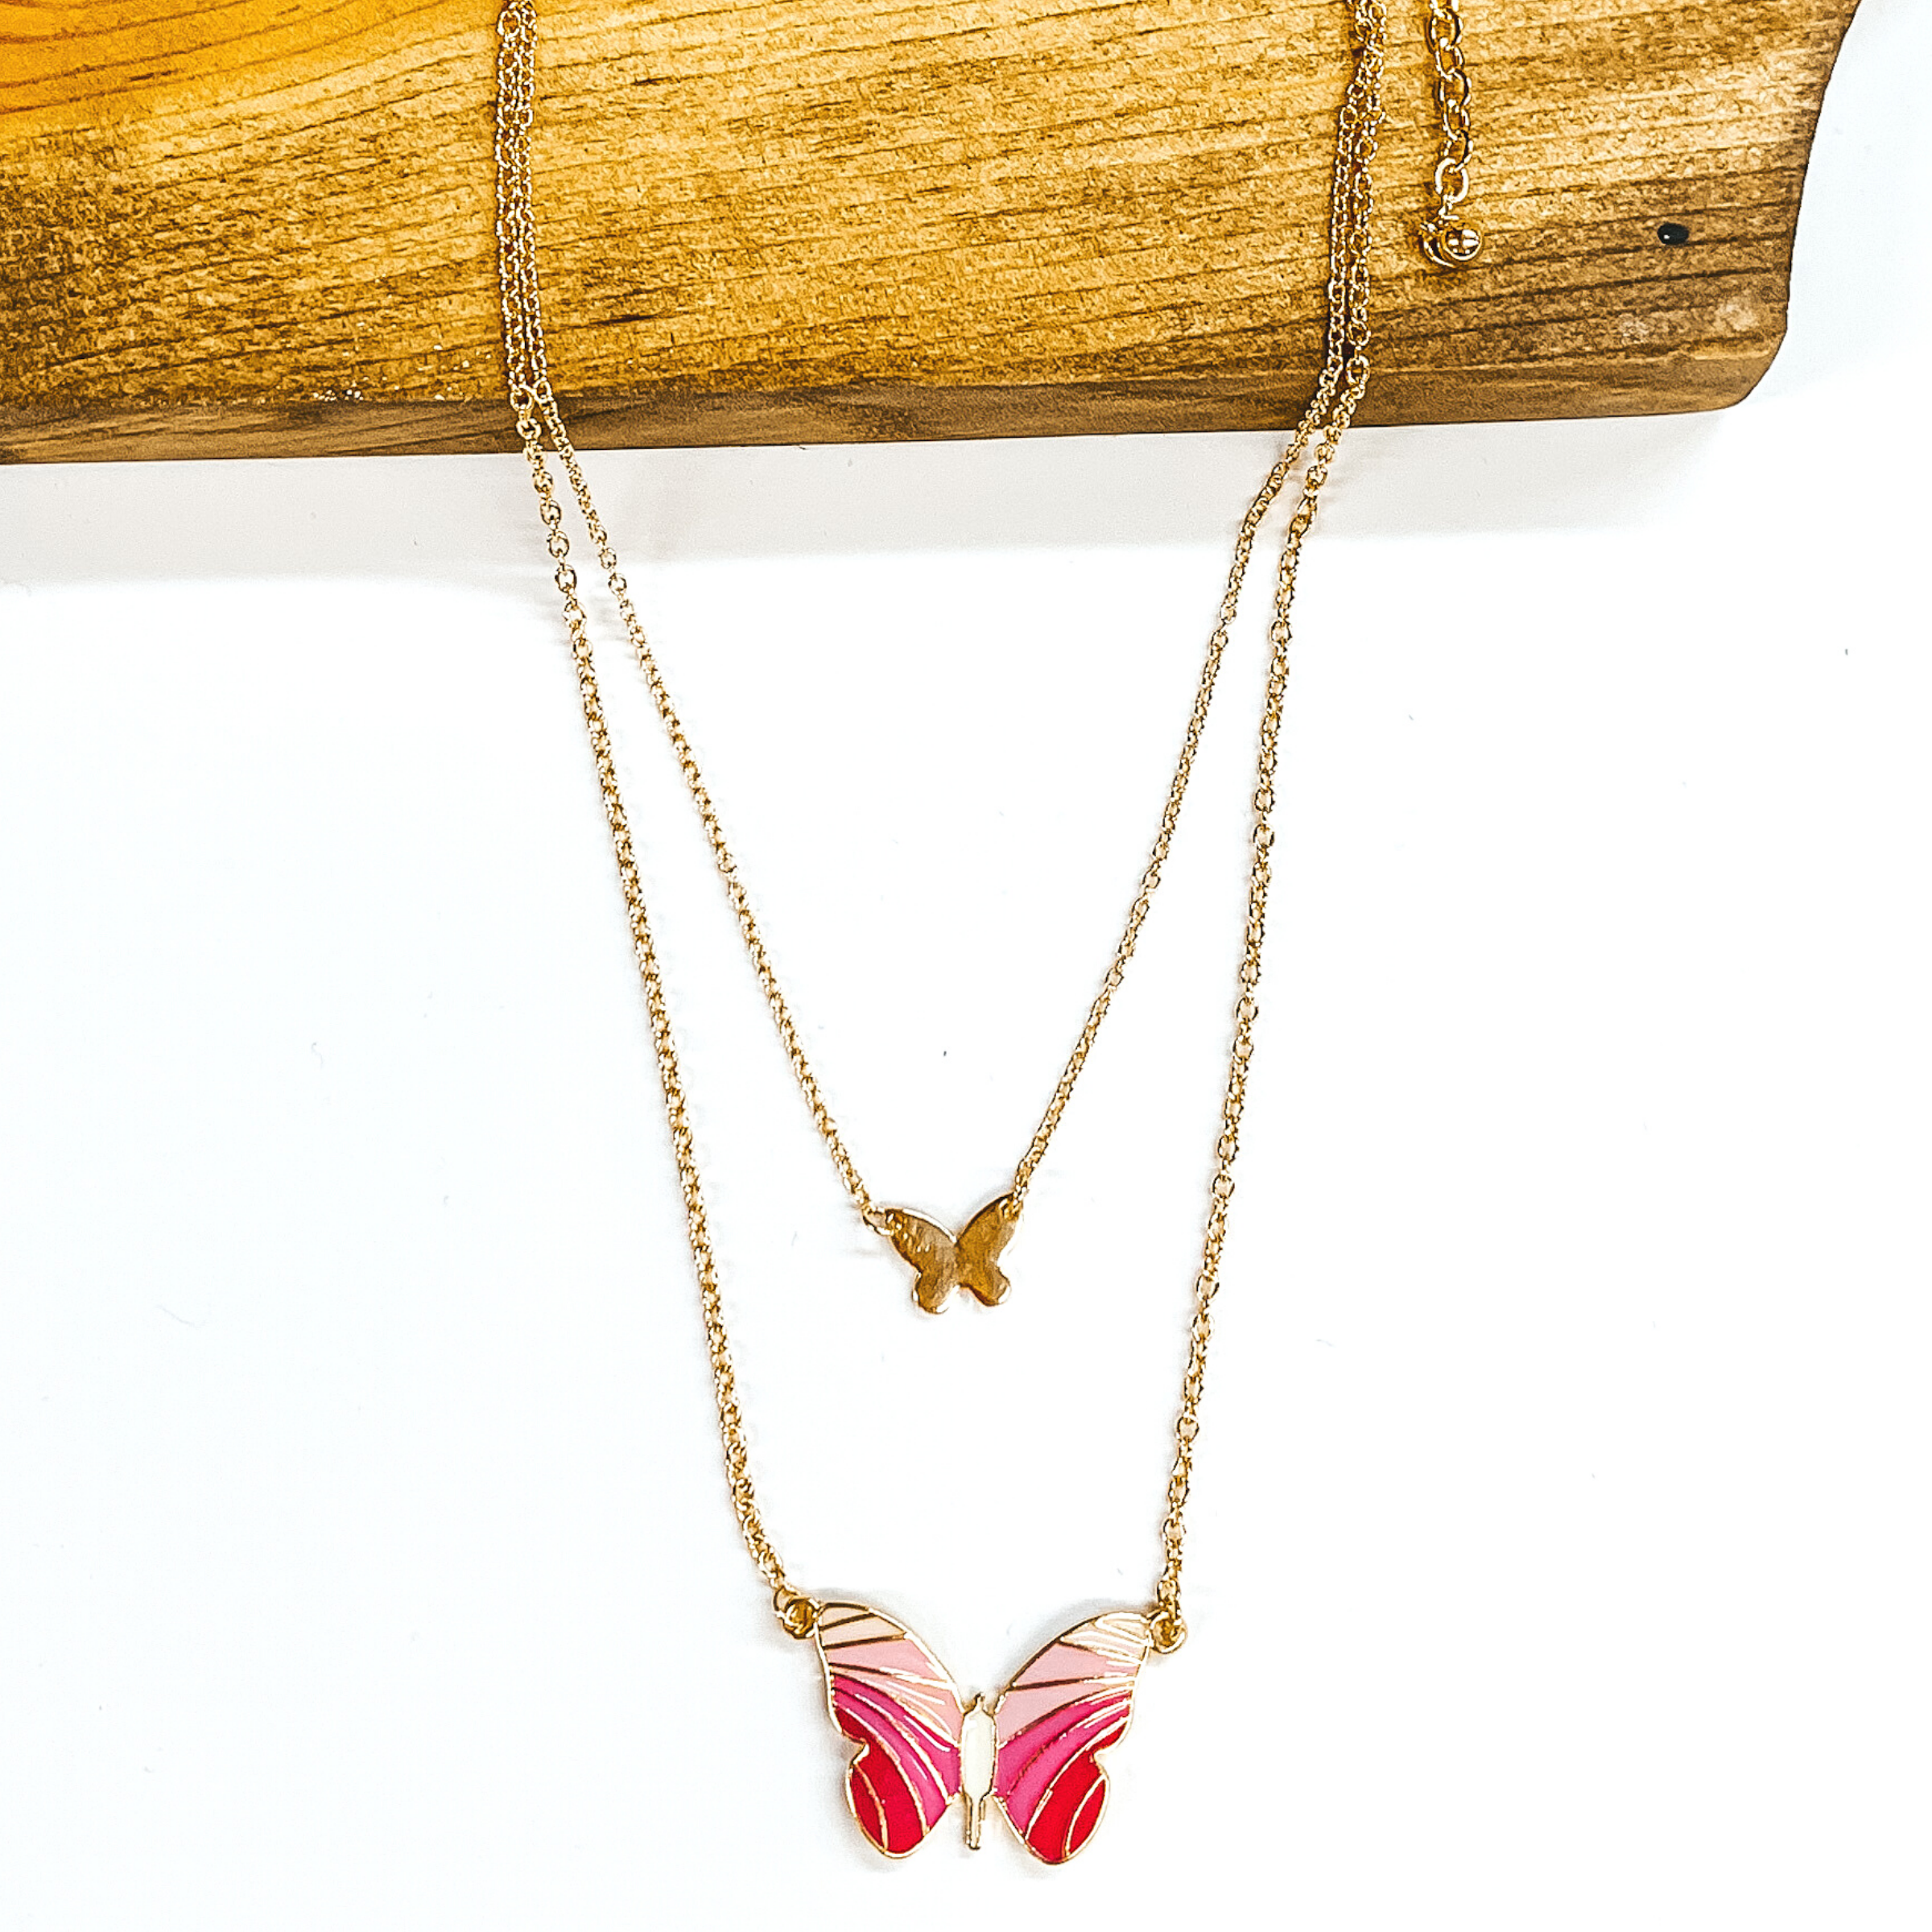 This a double gold chained necklace. The shorter chain has a small gold butterfly chain. The longer strand has a bigger butterfly pendant. The colored of the wings have colors starting off with the lightest pink and getting darker to a darker pink at the bottom of the wings. This necklace is partially laying on a dark piece of wood on a white background. 